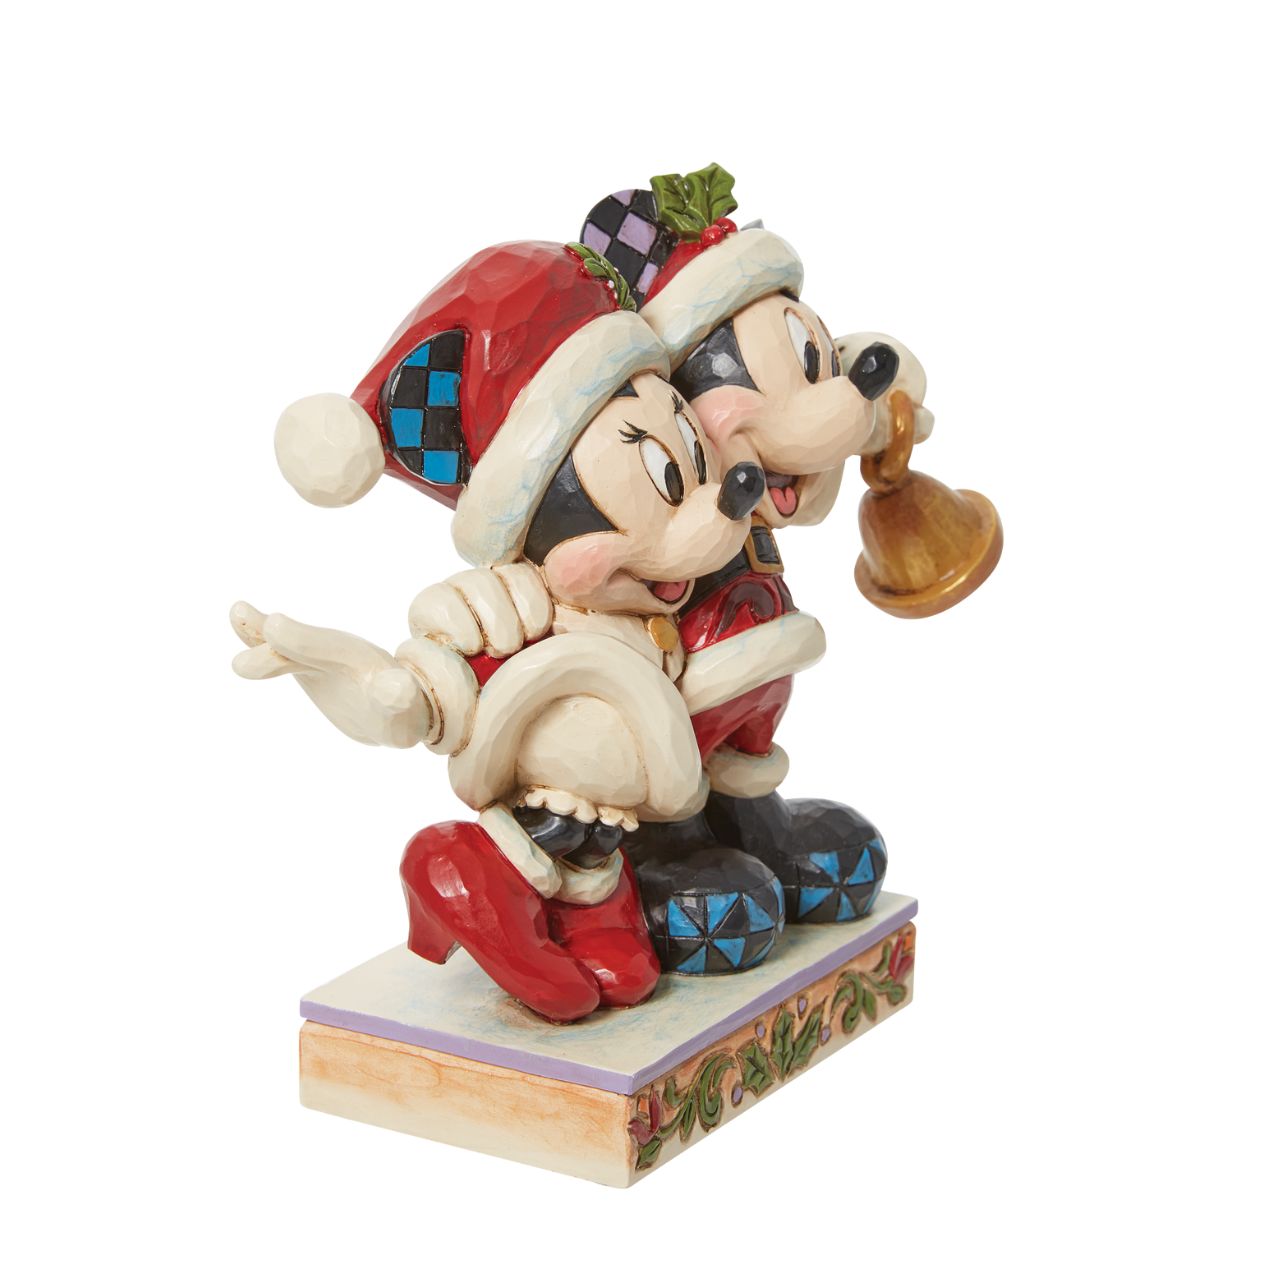 Disney Mickey & Minnie Mouse Santa Figurine by Jim Shore  Featuring the iconic couple, Mickey & Minnie Mouse, this festive figurine is the perfect gift for any Disney Fan. Designed by award winning artist Jim Shore, this Christmas inspired piece shows Mickey & Minnie channelling Santa and dressing up as Mr & Mrs Claus.